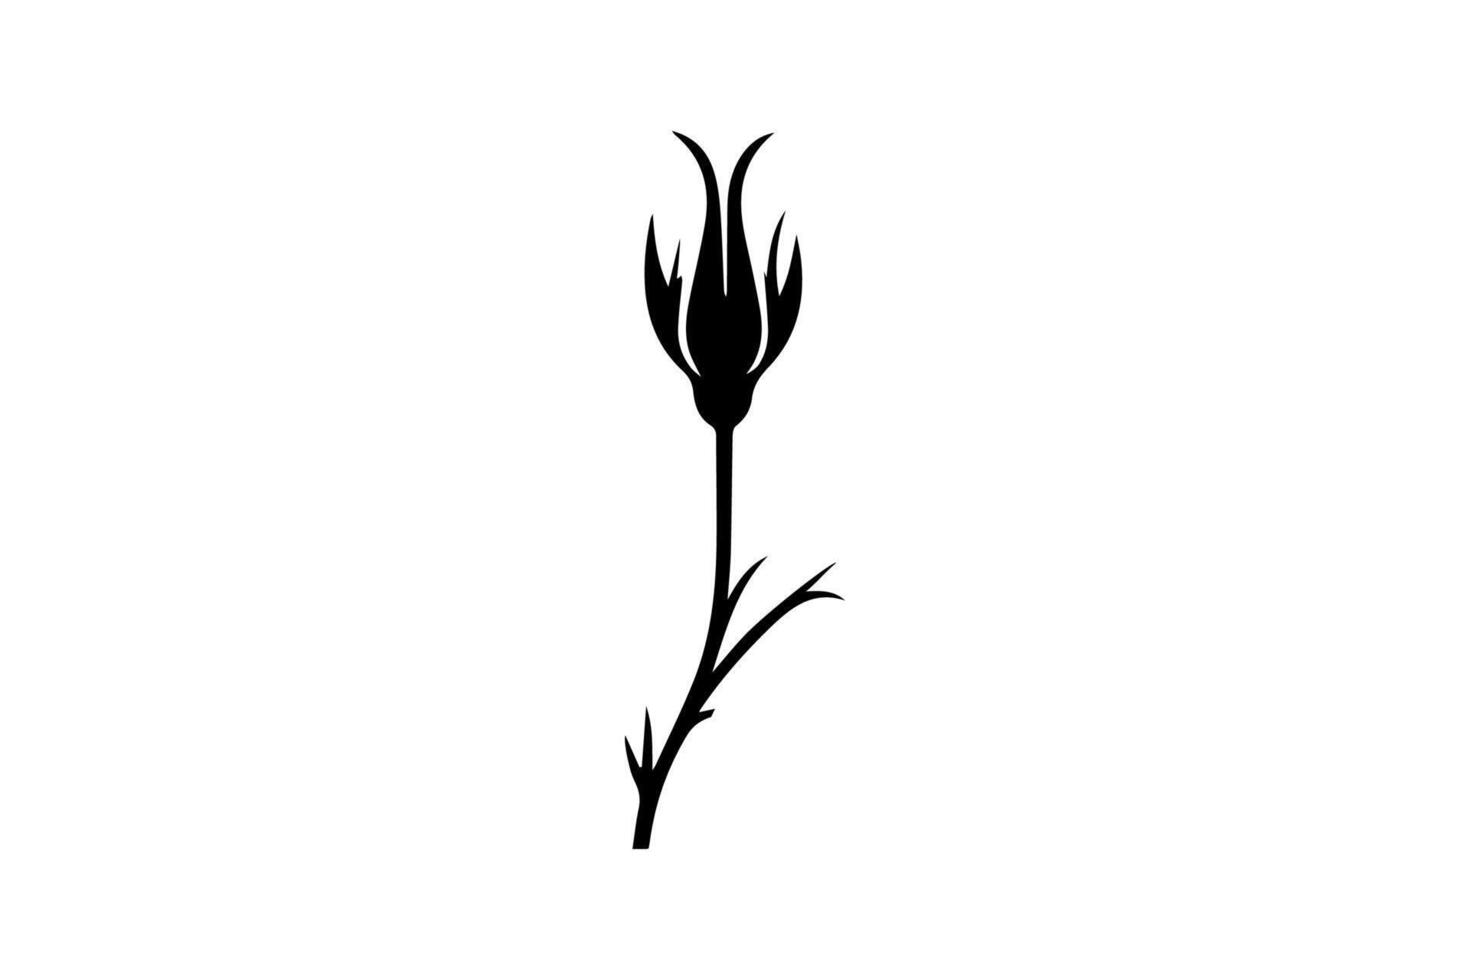 Rose Thorns Silhouette vector